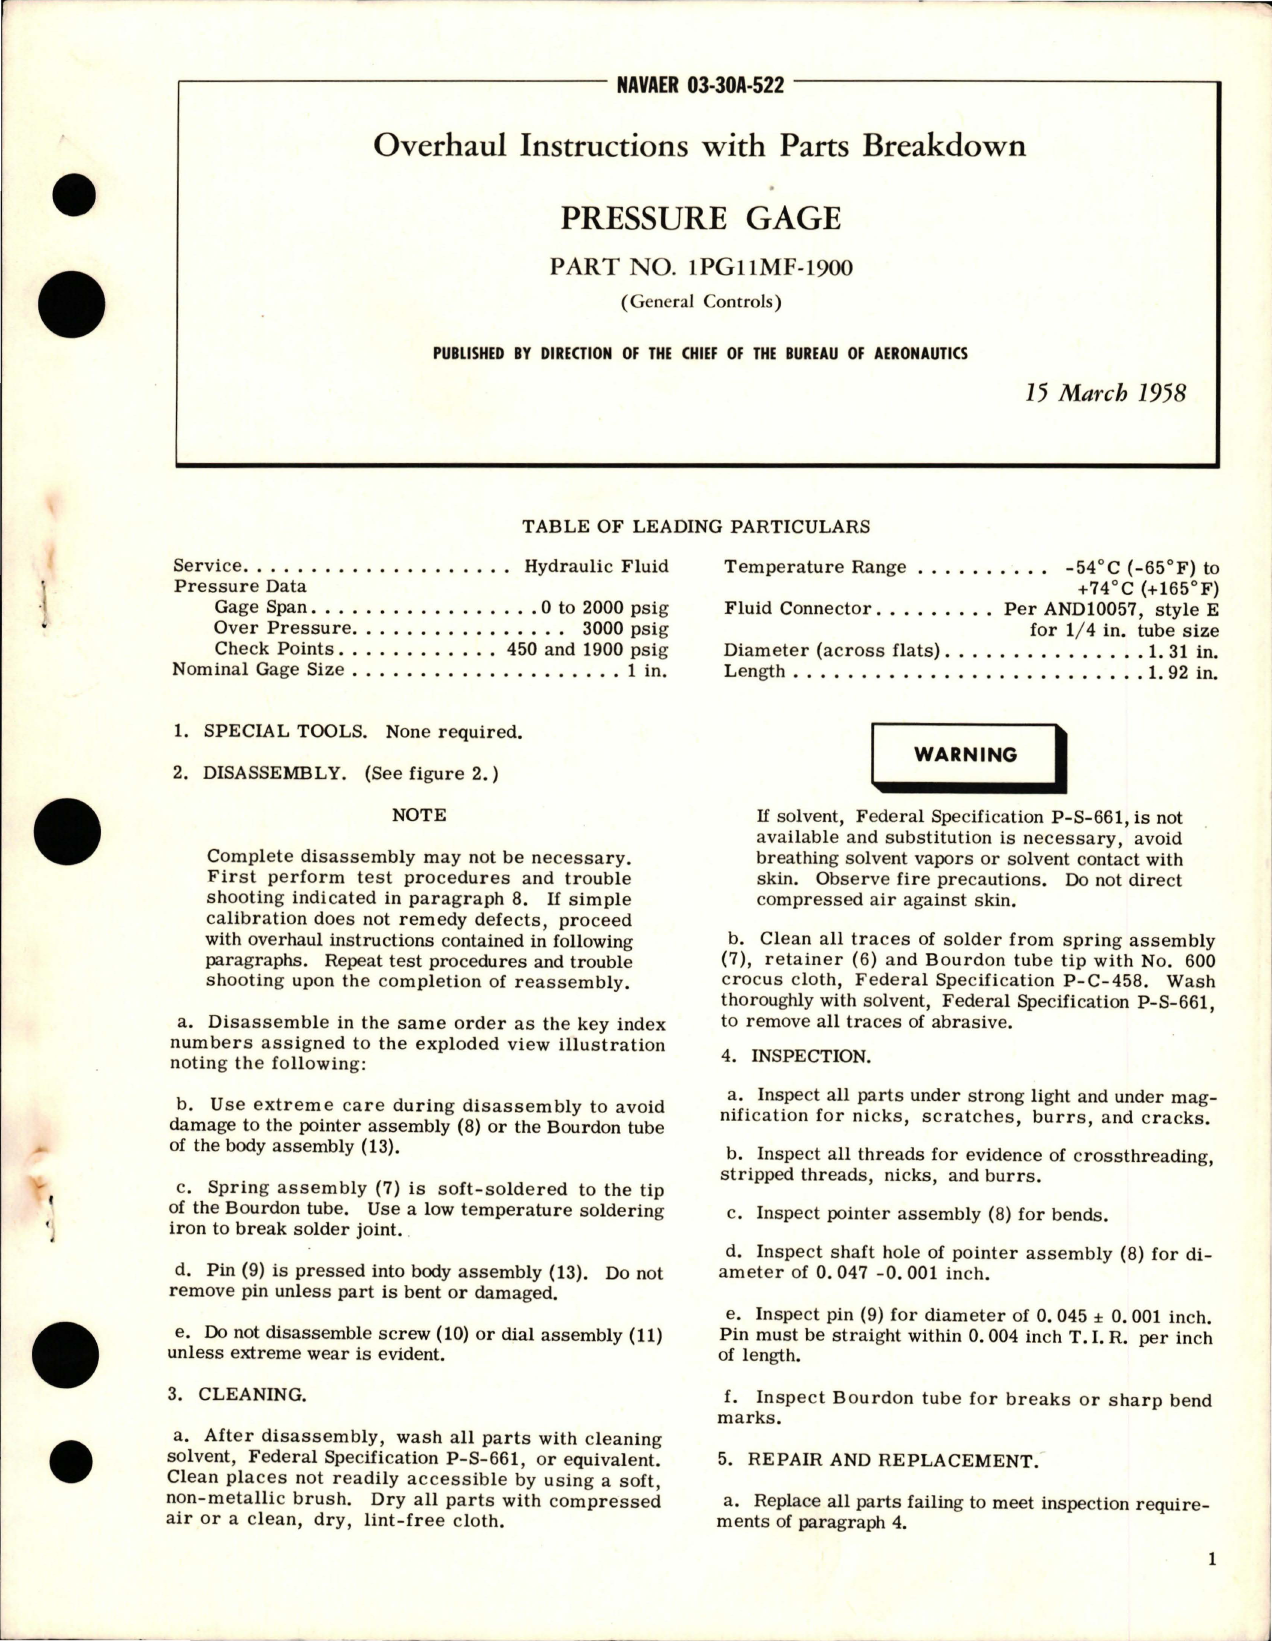 Sample page 1 from AirCorps Library document: Overhaul Instructions with Parts Breakdown for Pressure Gage - Part 1PG11MF-1900 